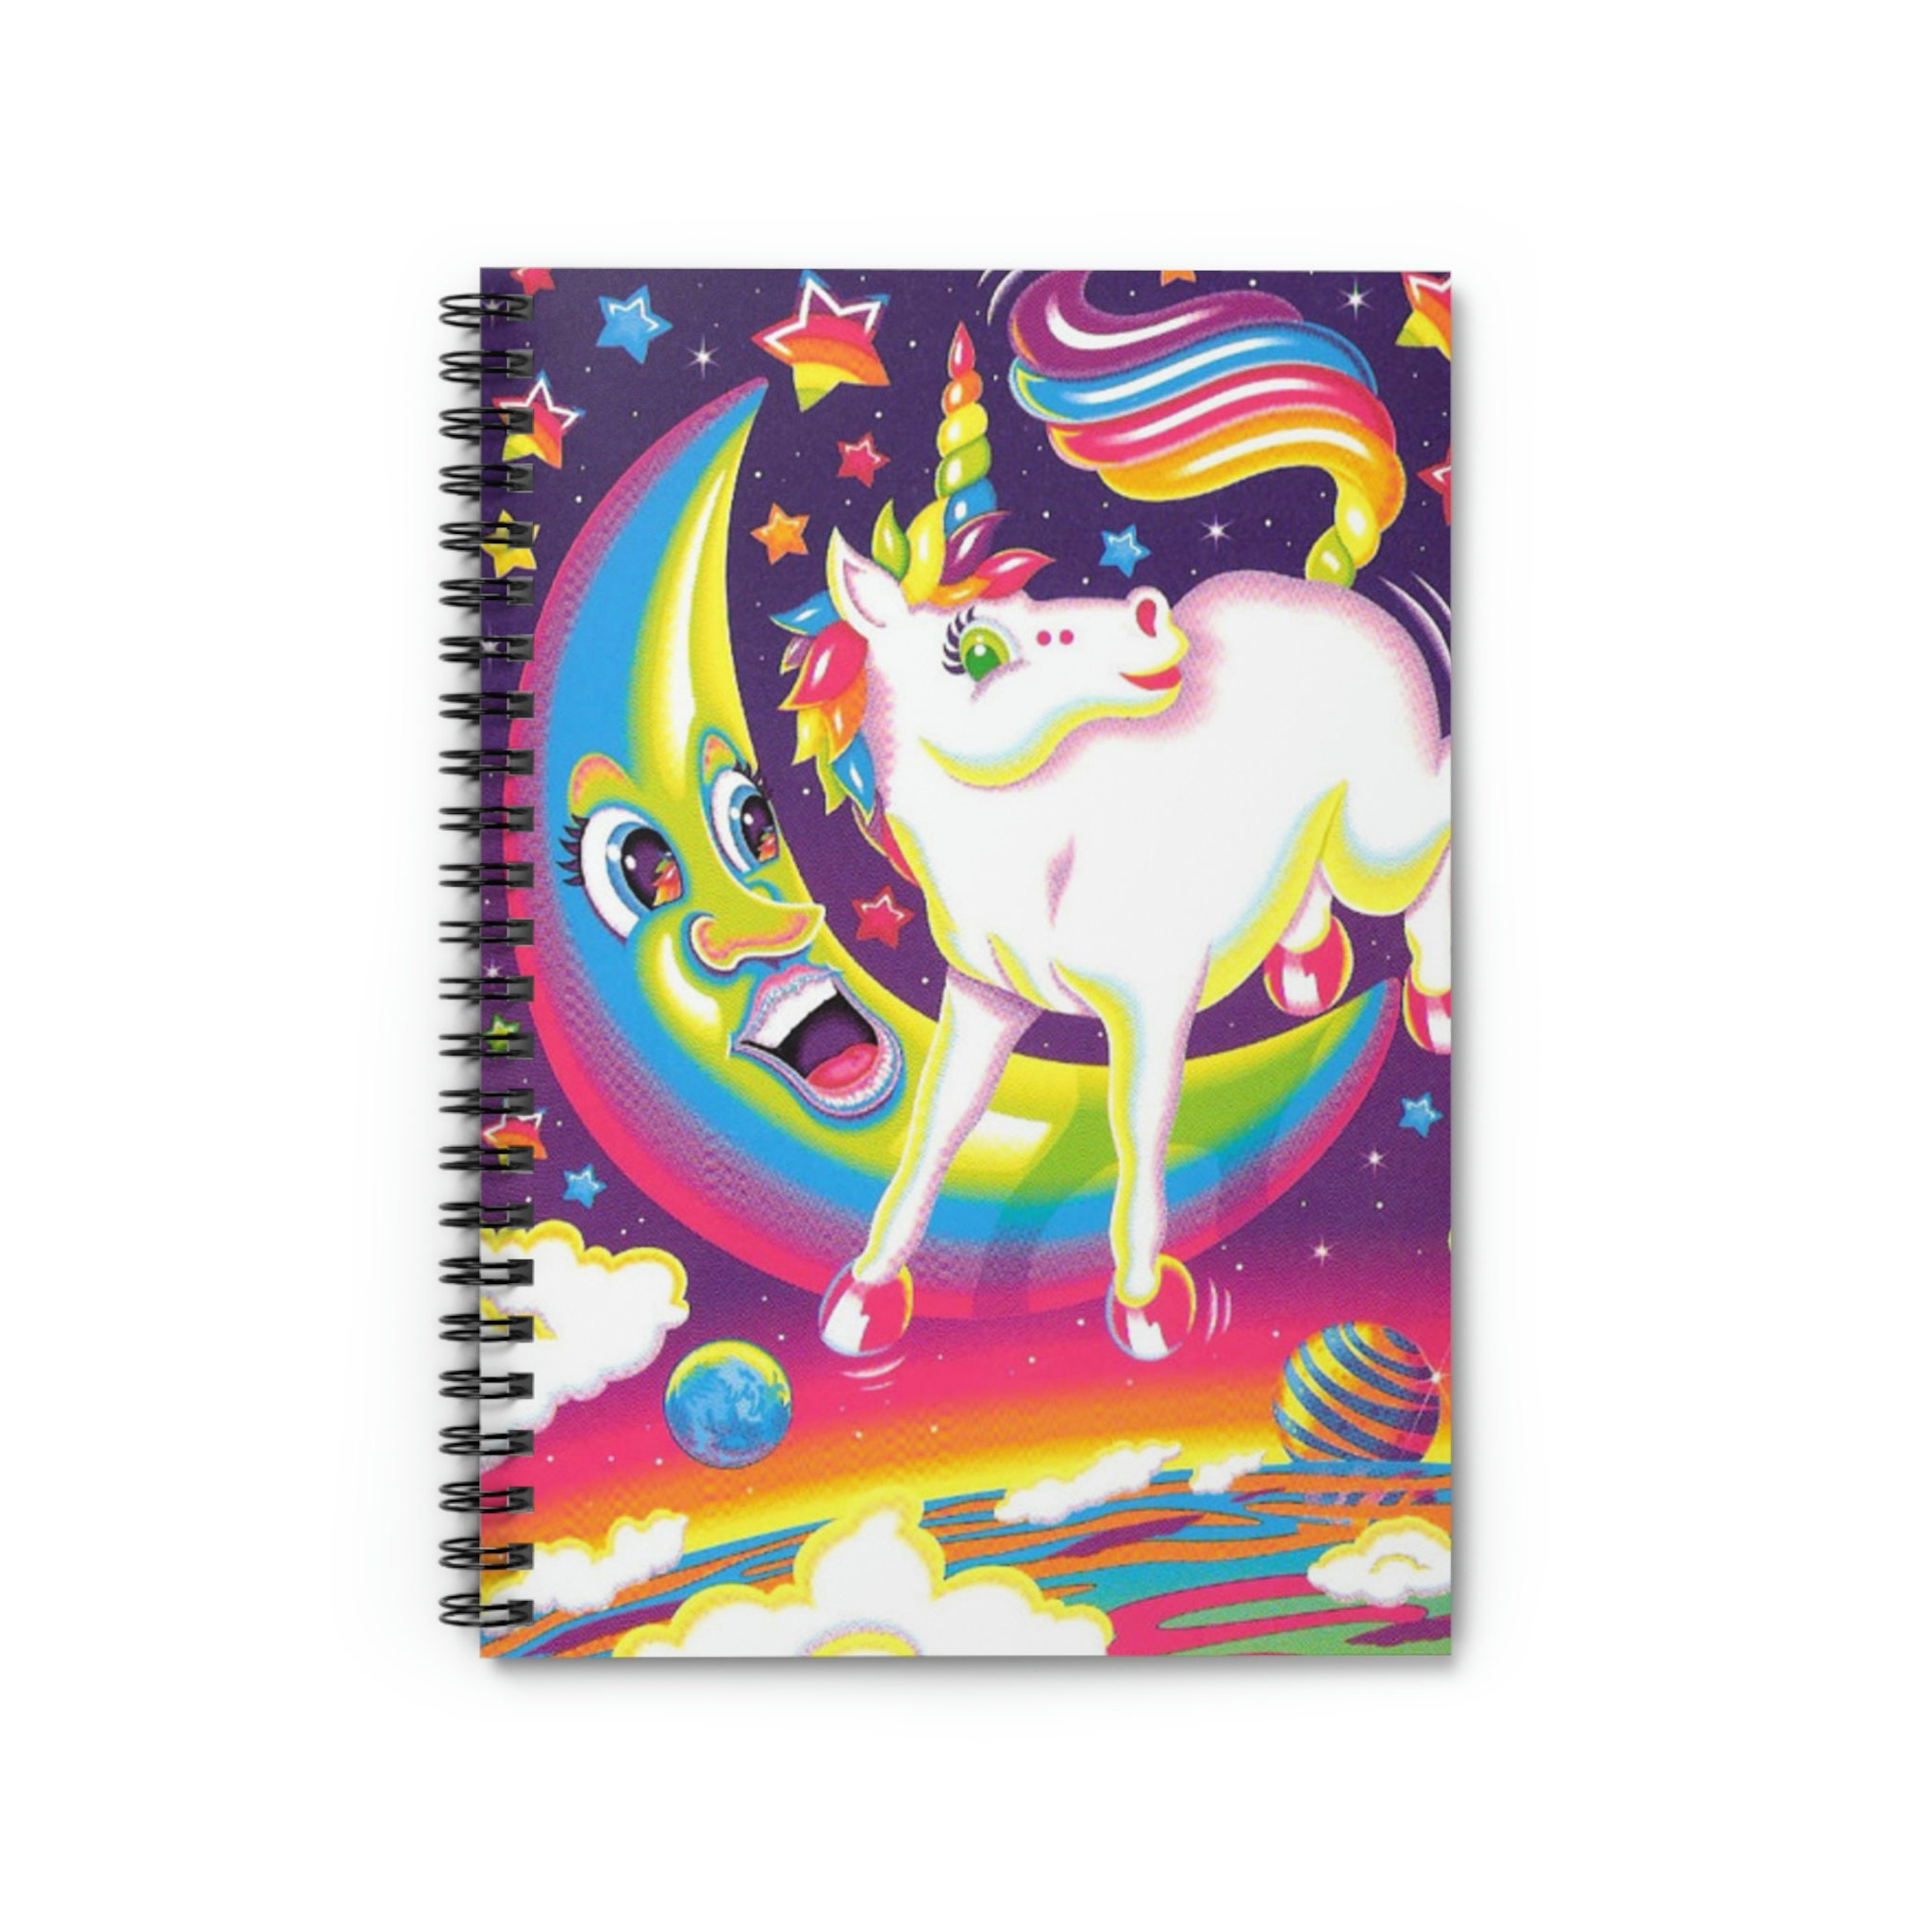 Lisa Frank is back! Here are our favorite items featuring the fun retro  designs